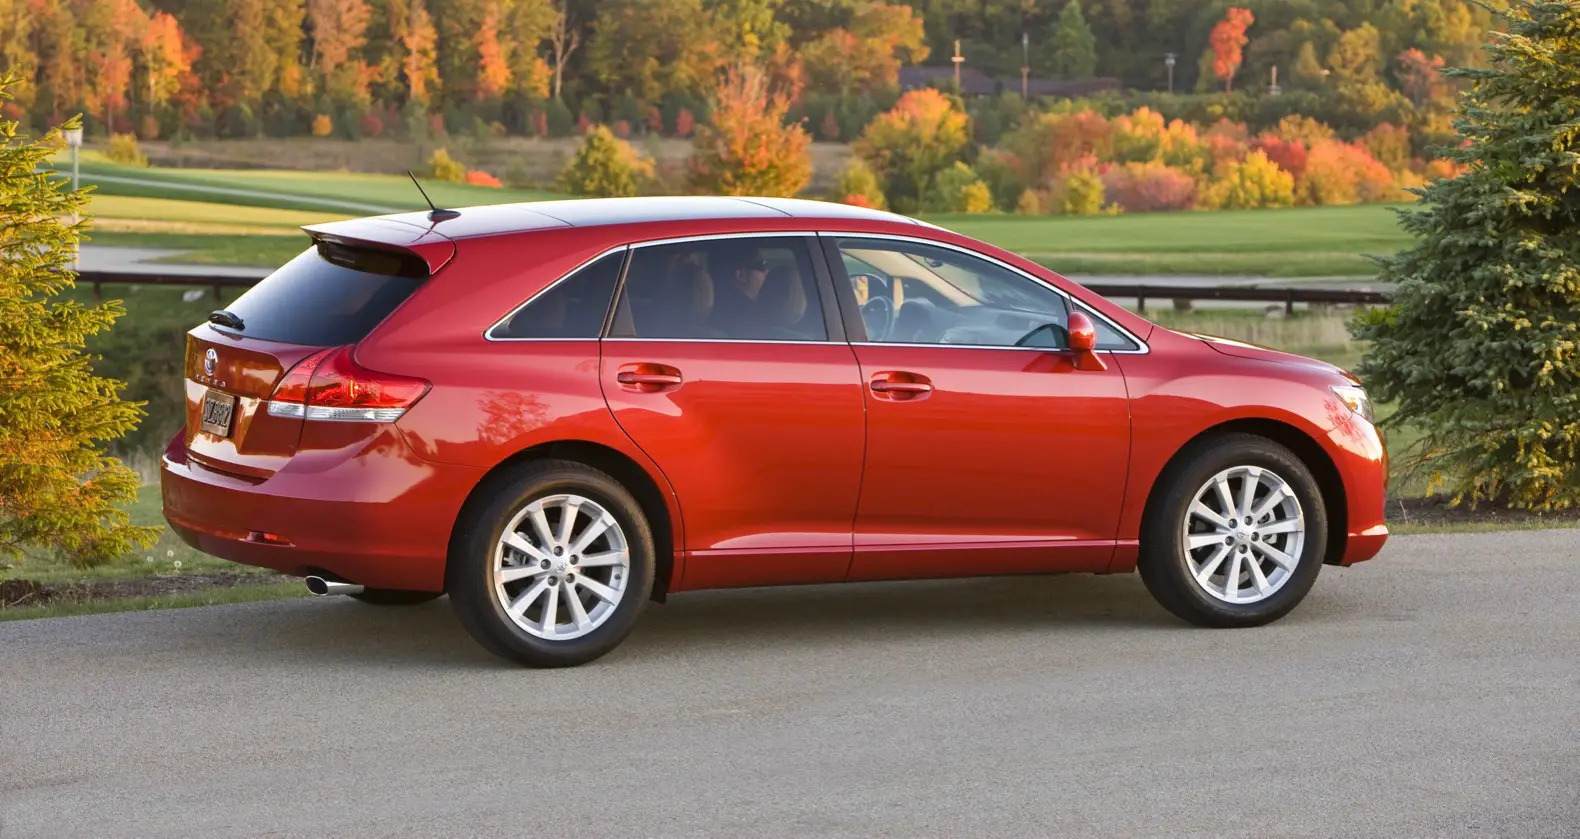 Toyota Is Killing The Venza The Brand and SUV Market